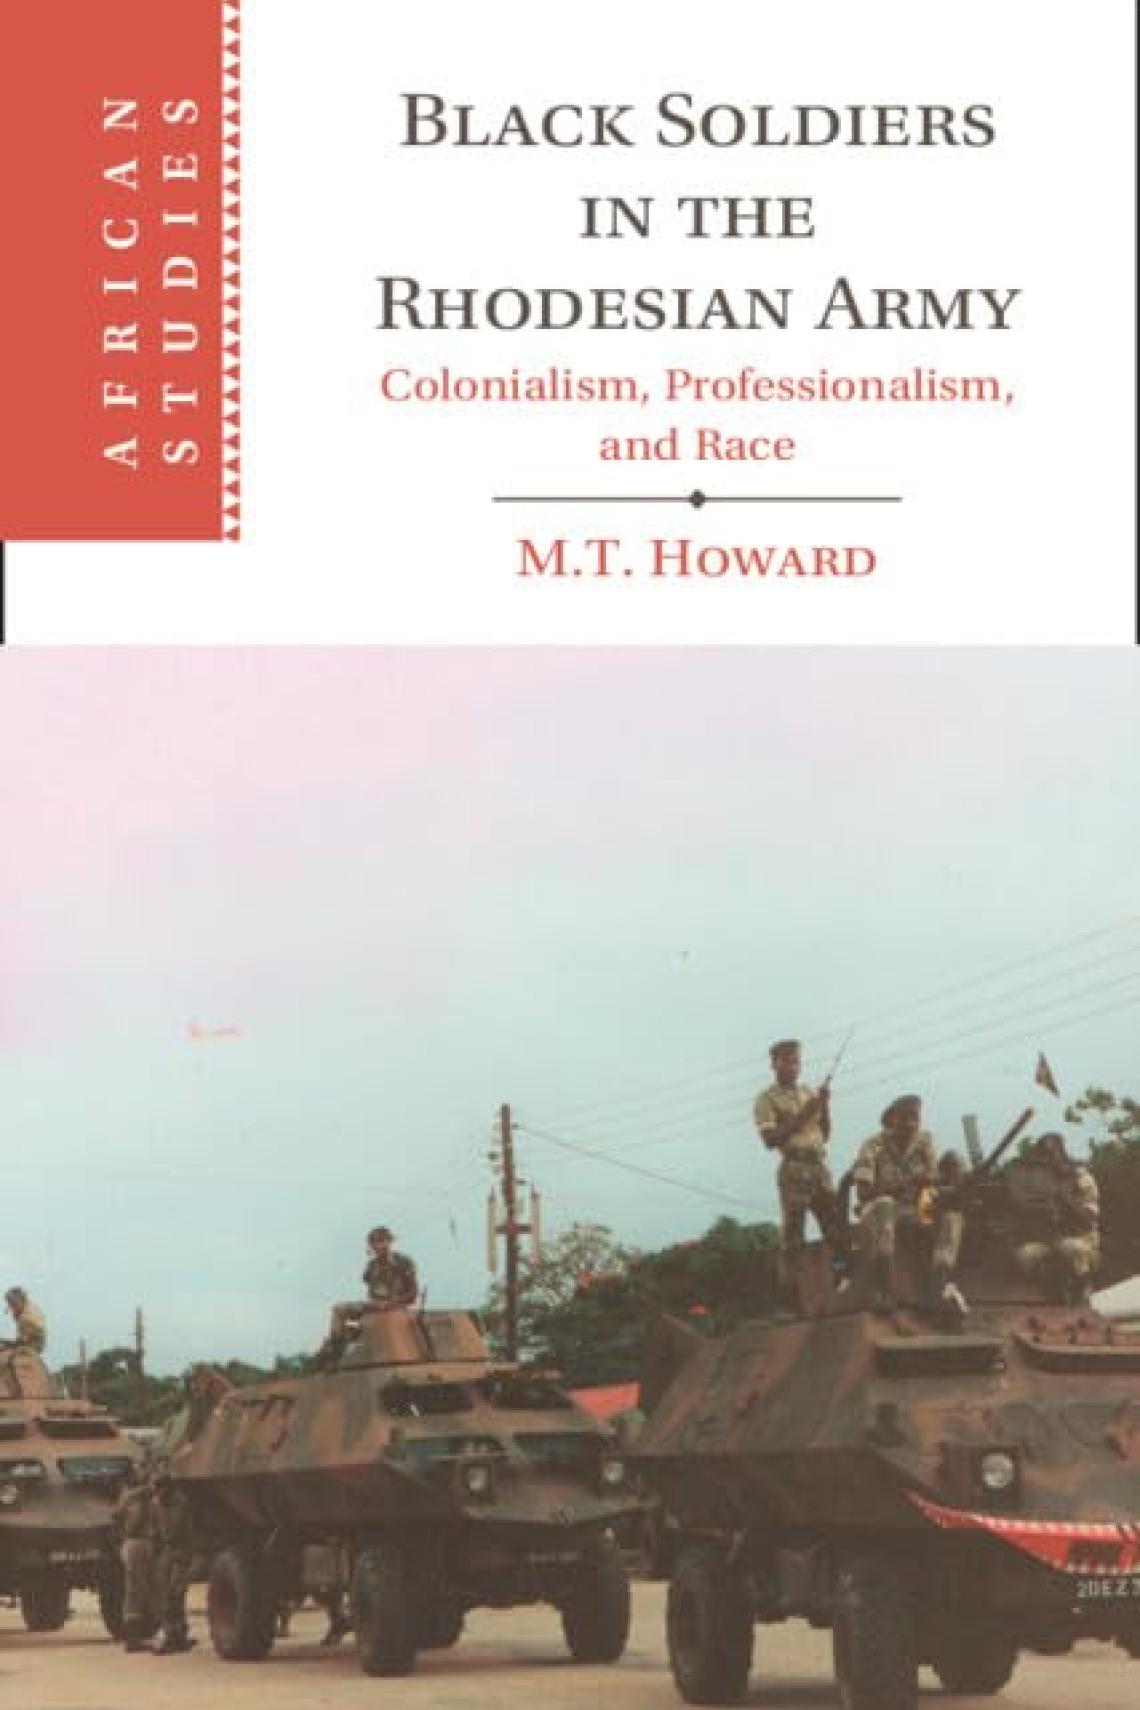 Book cover reading Black Soldiers in the Rhodesian Army